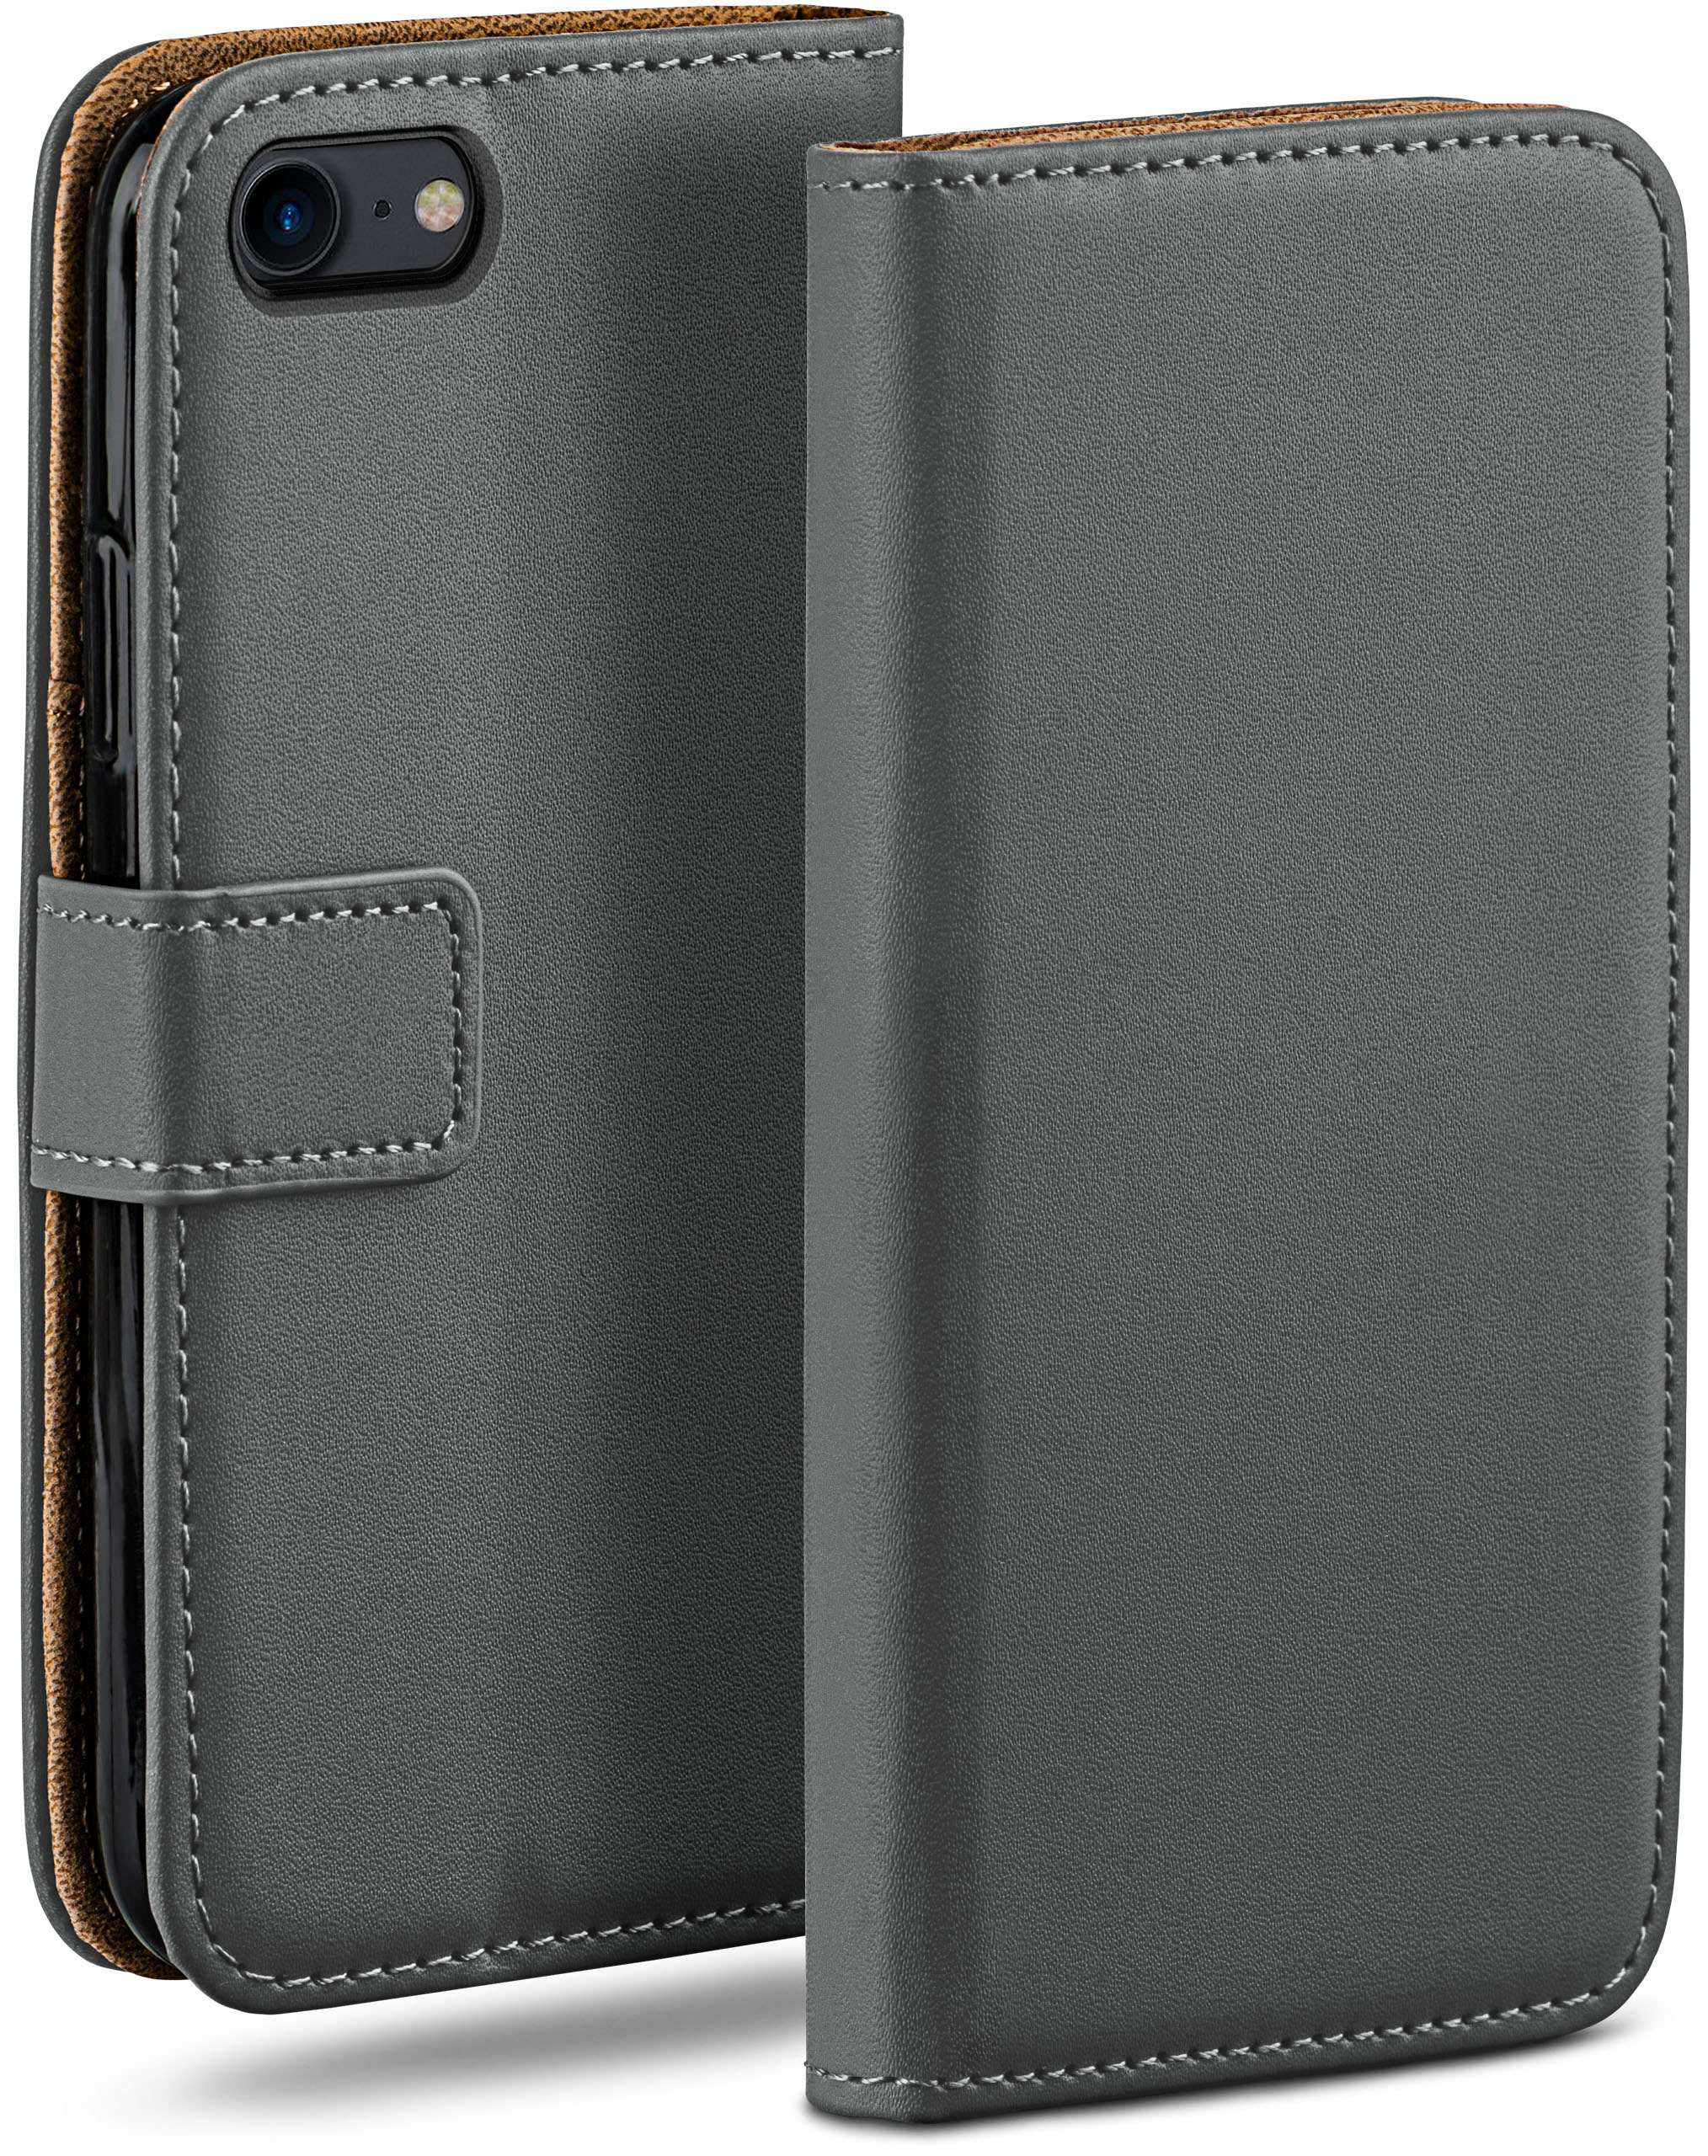 Case, iPhone Bookcover, iPhone 8, MOEX Apple, / 7 Anthracite-Gray Book